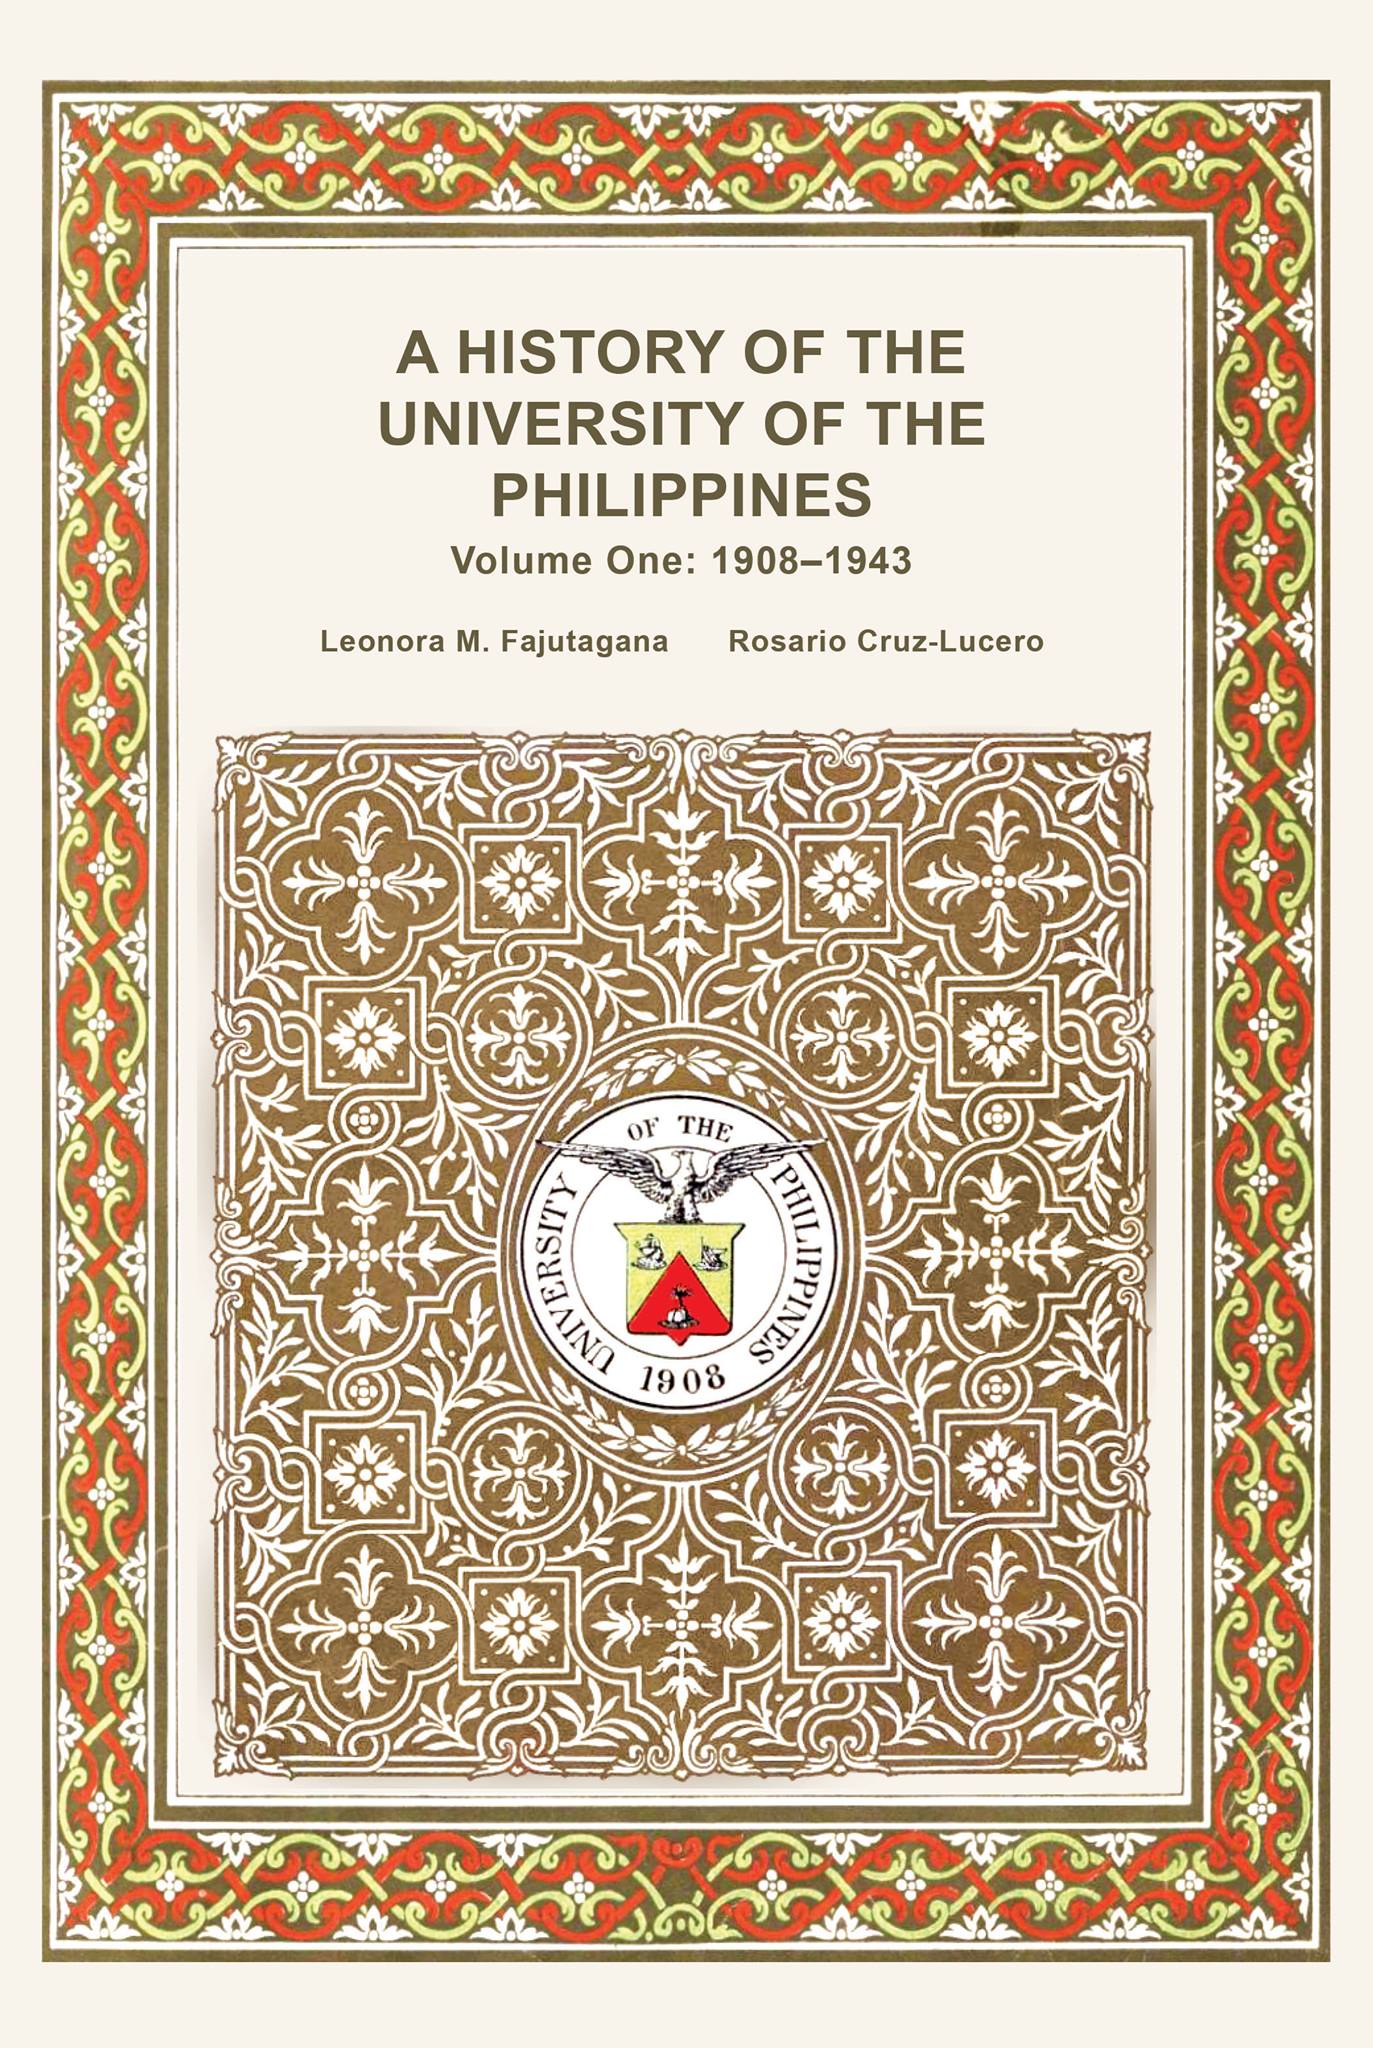 A history of the University of the Philippines.